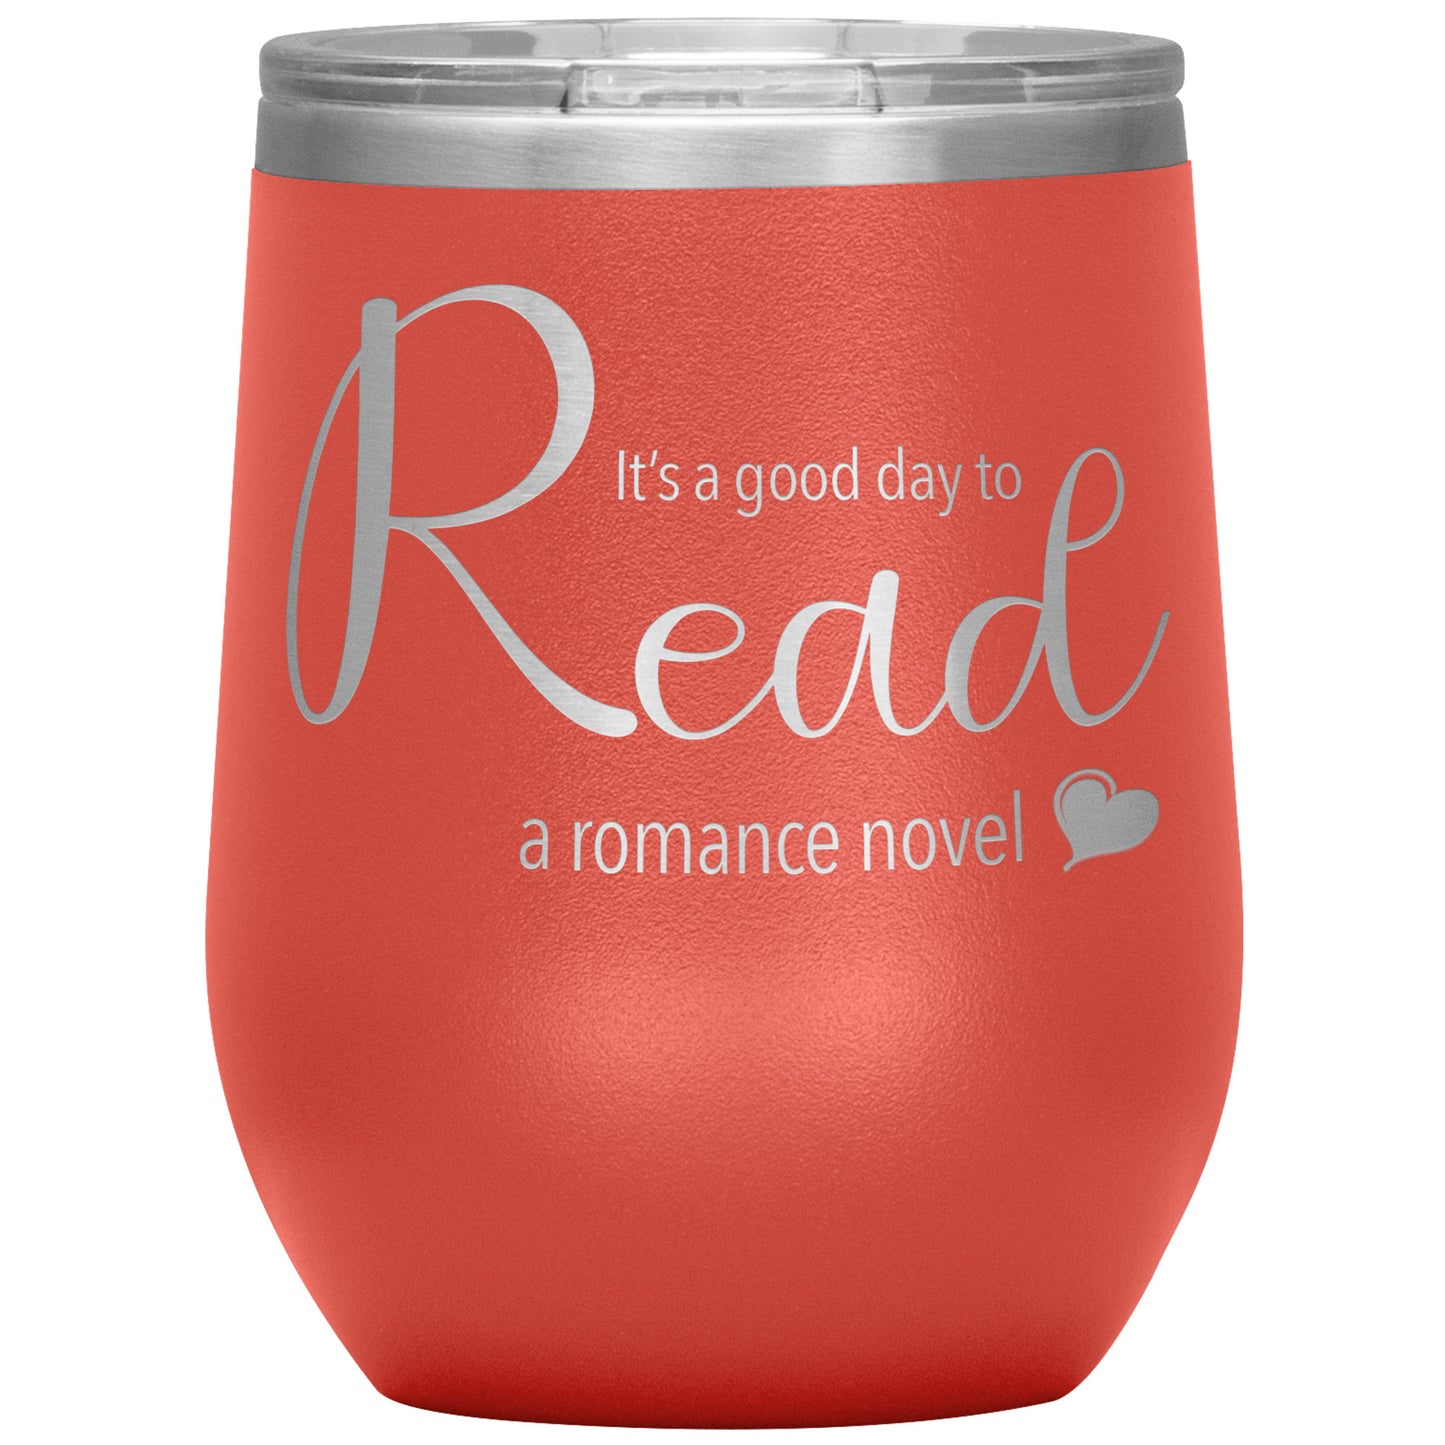 A good day to read - Wine Tumbler